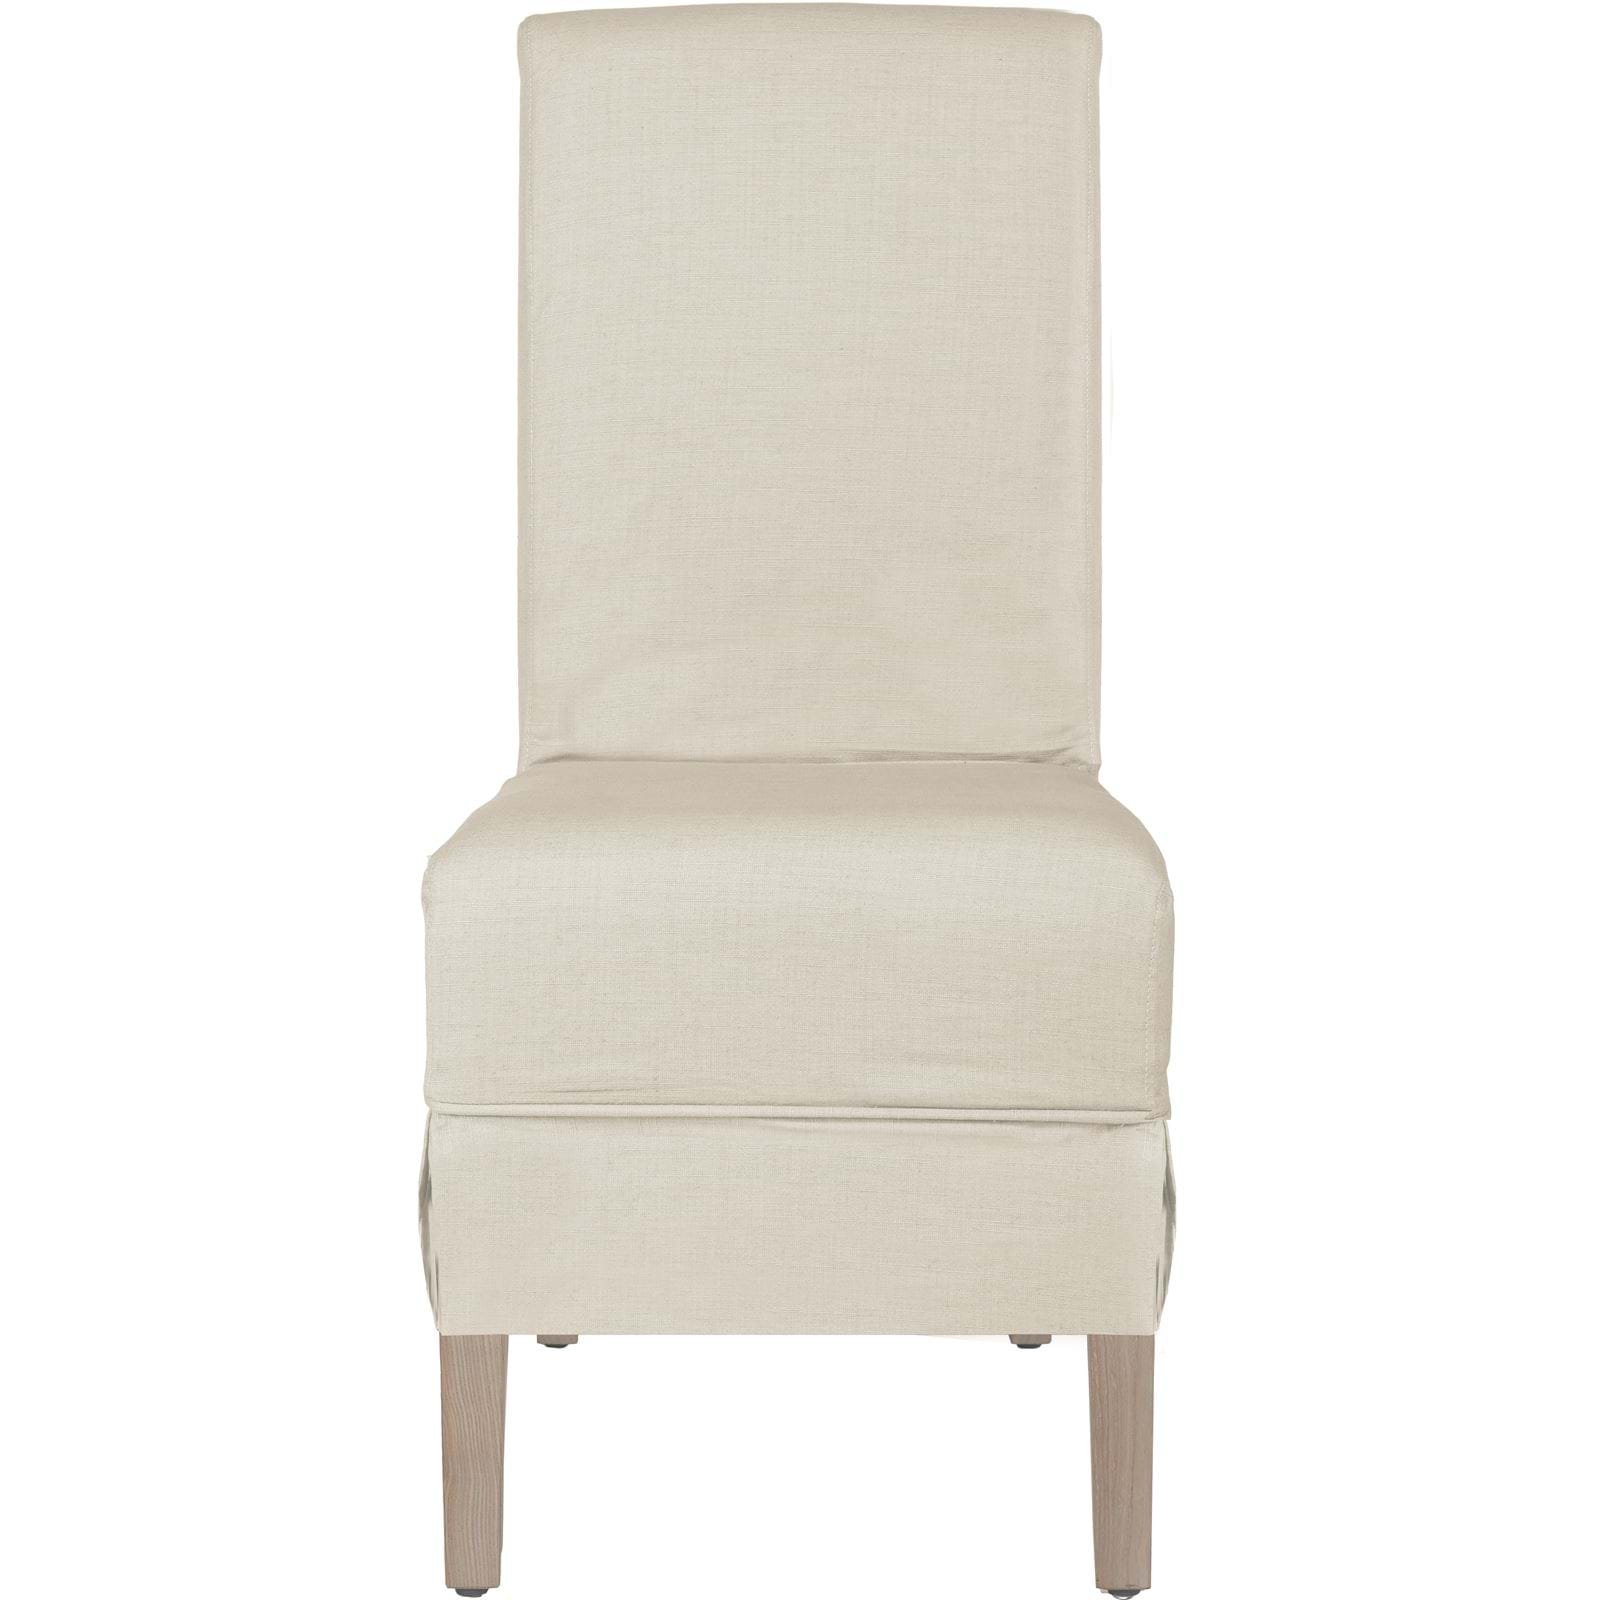 Long Island Stretch Dining Chair Covers Uk Neptune